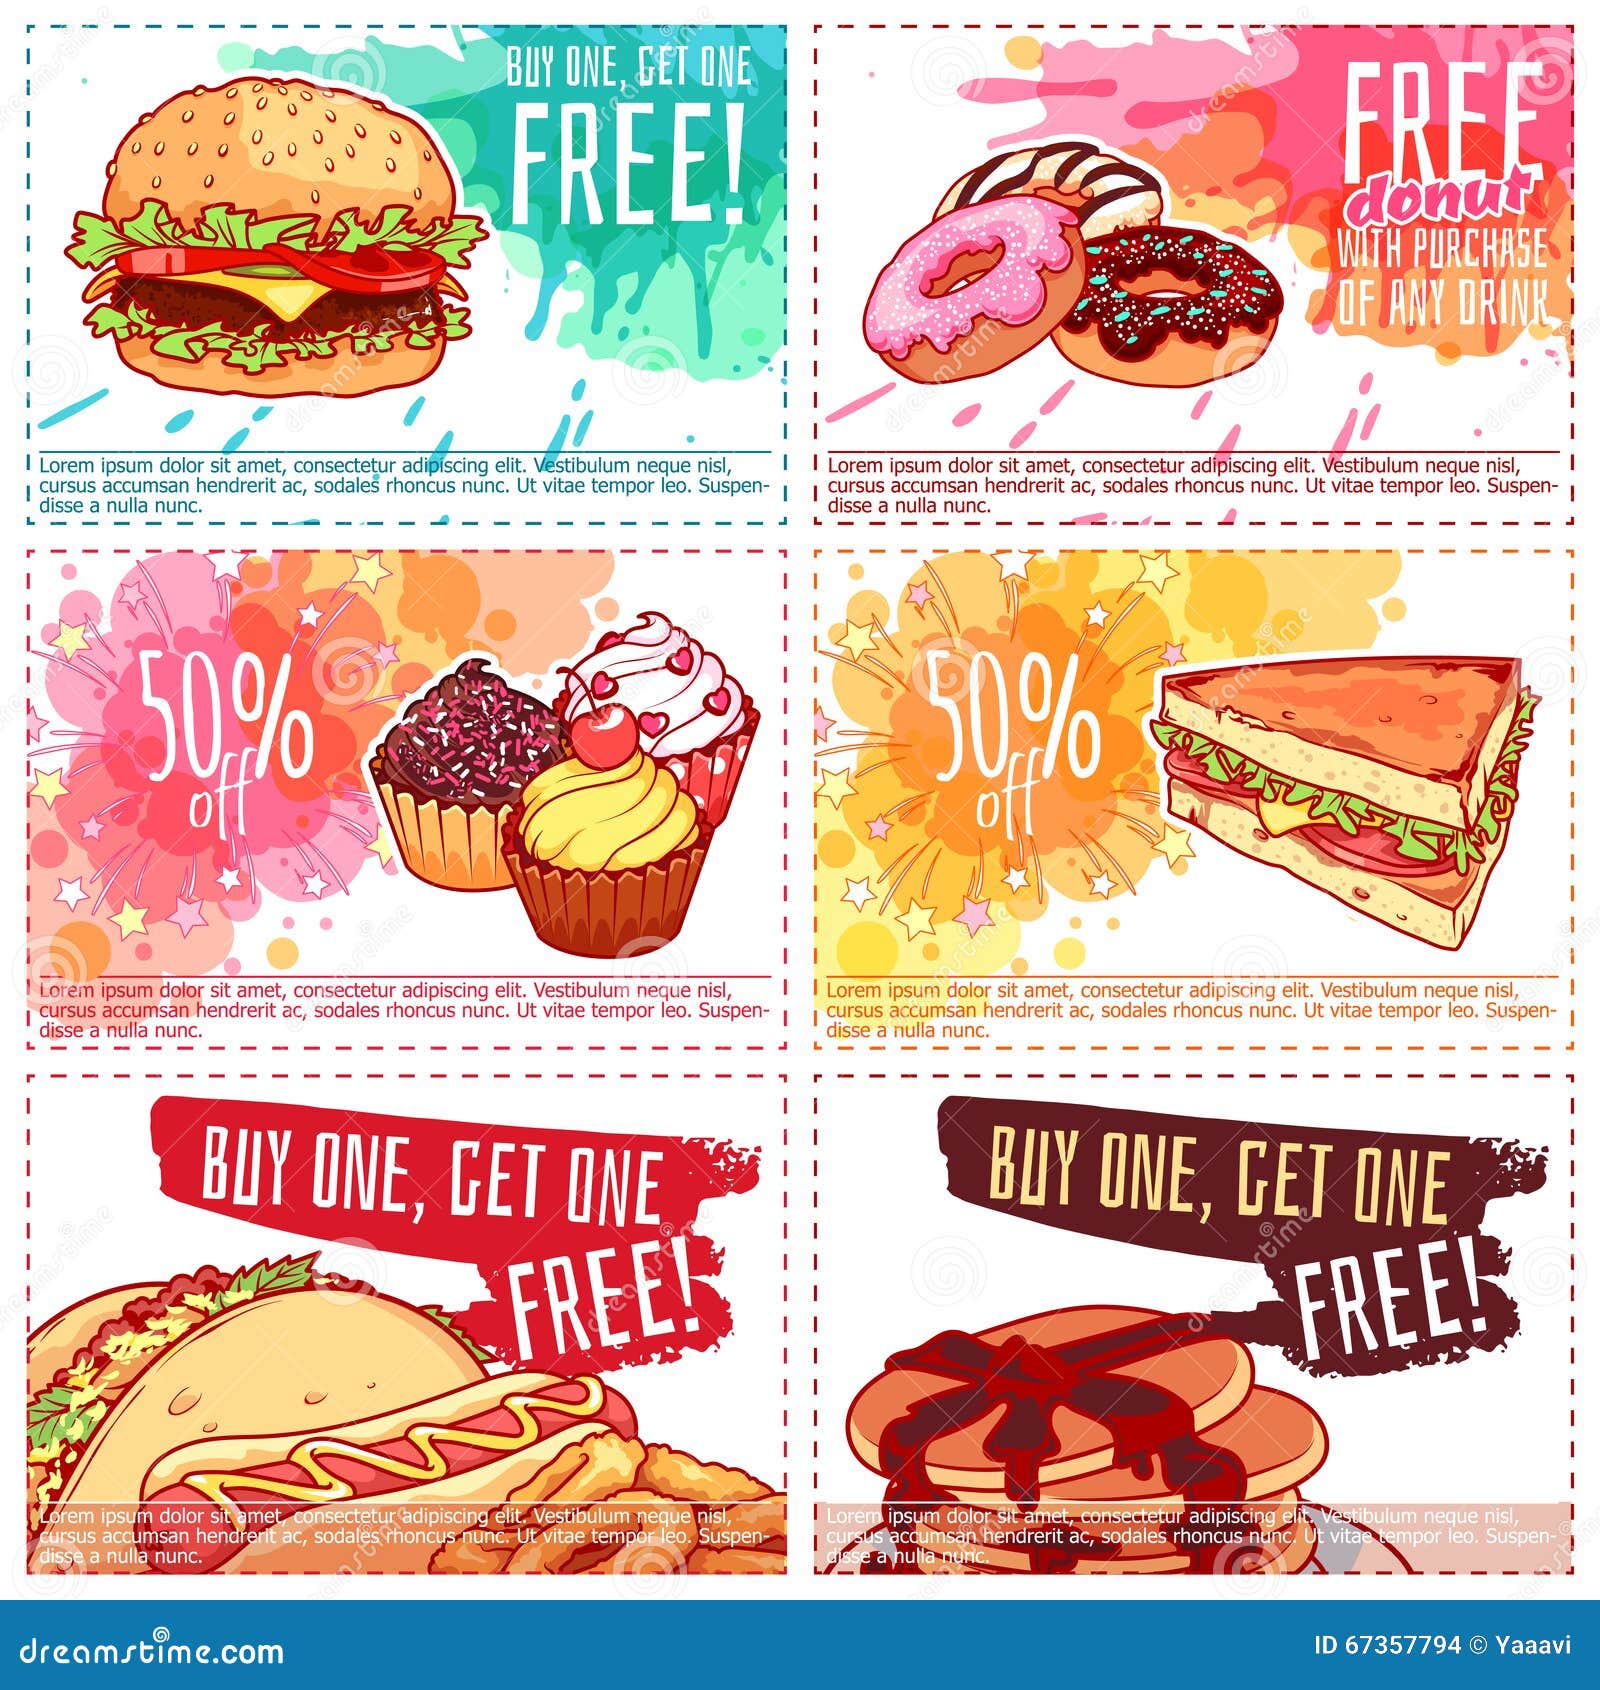 Discounted dessert coupons